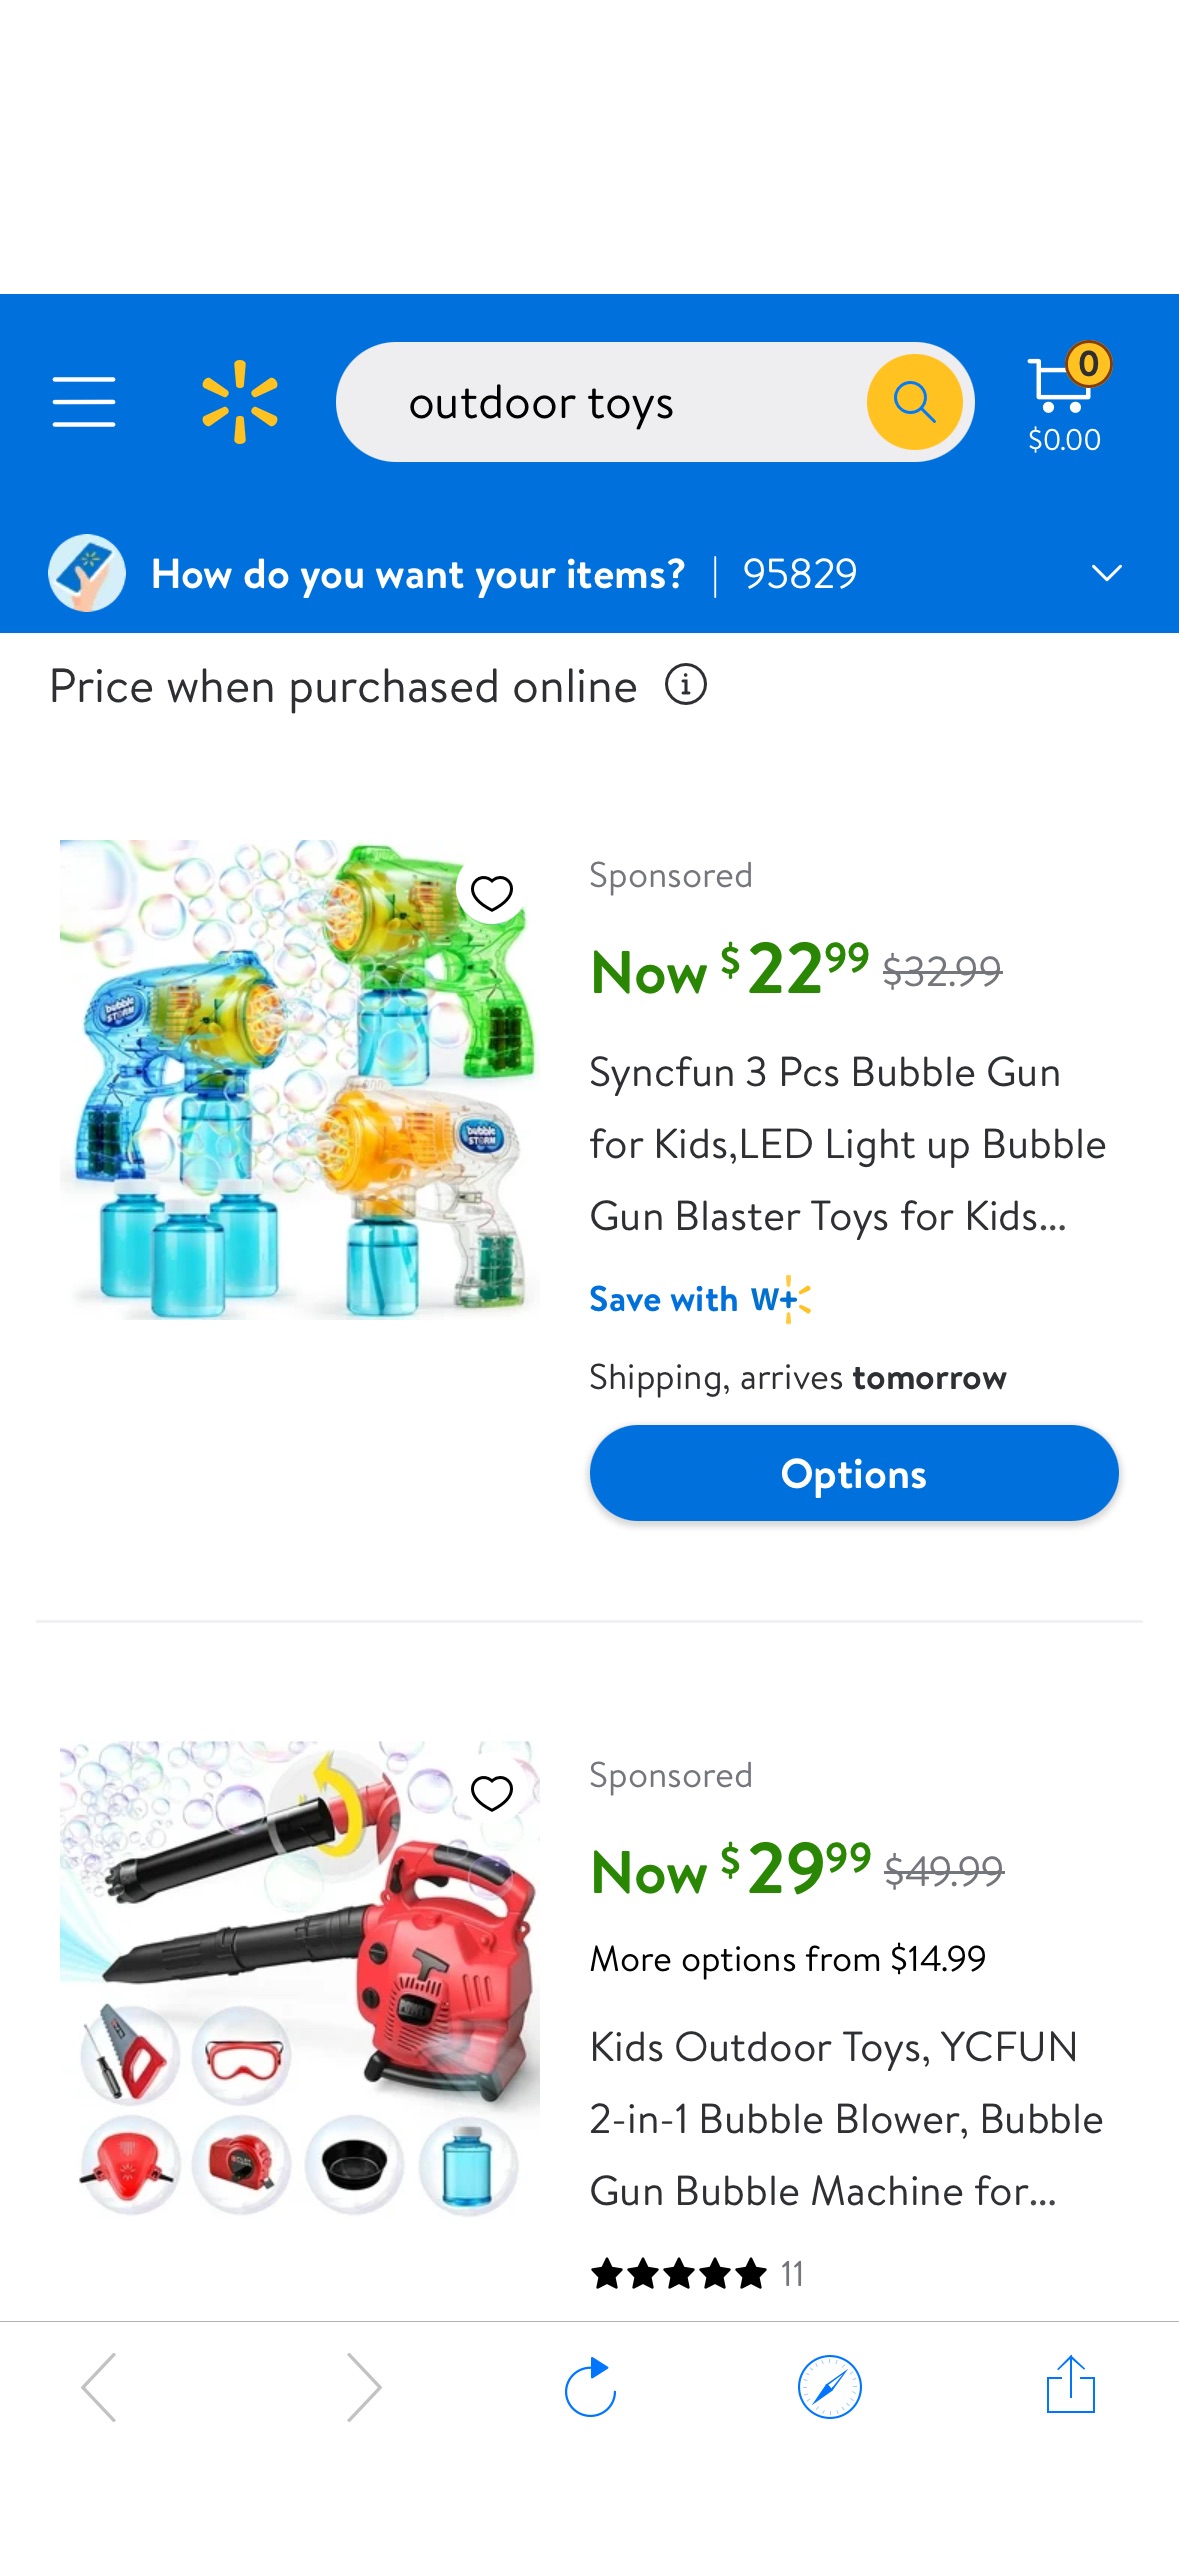 Outdoor Toy Clearance at Walmart